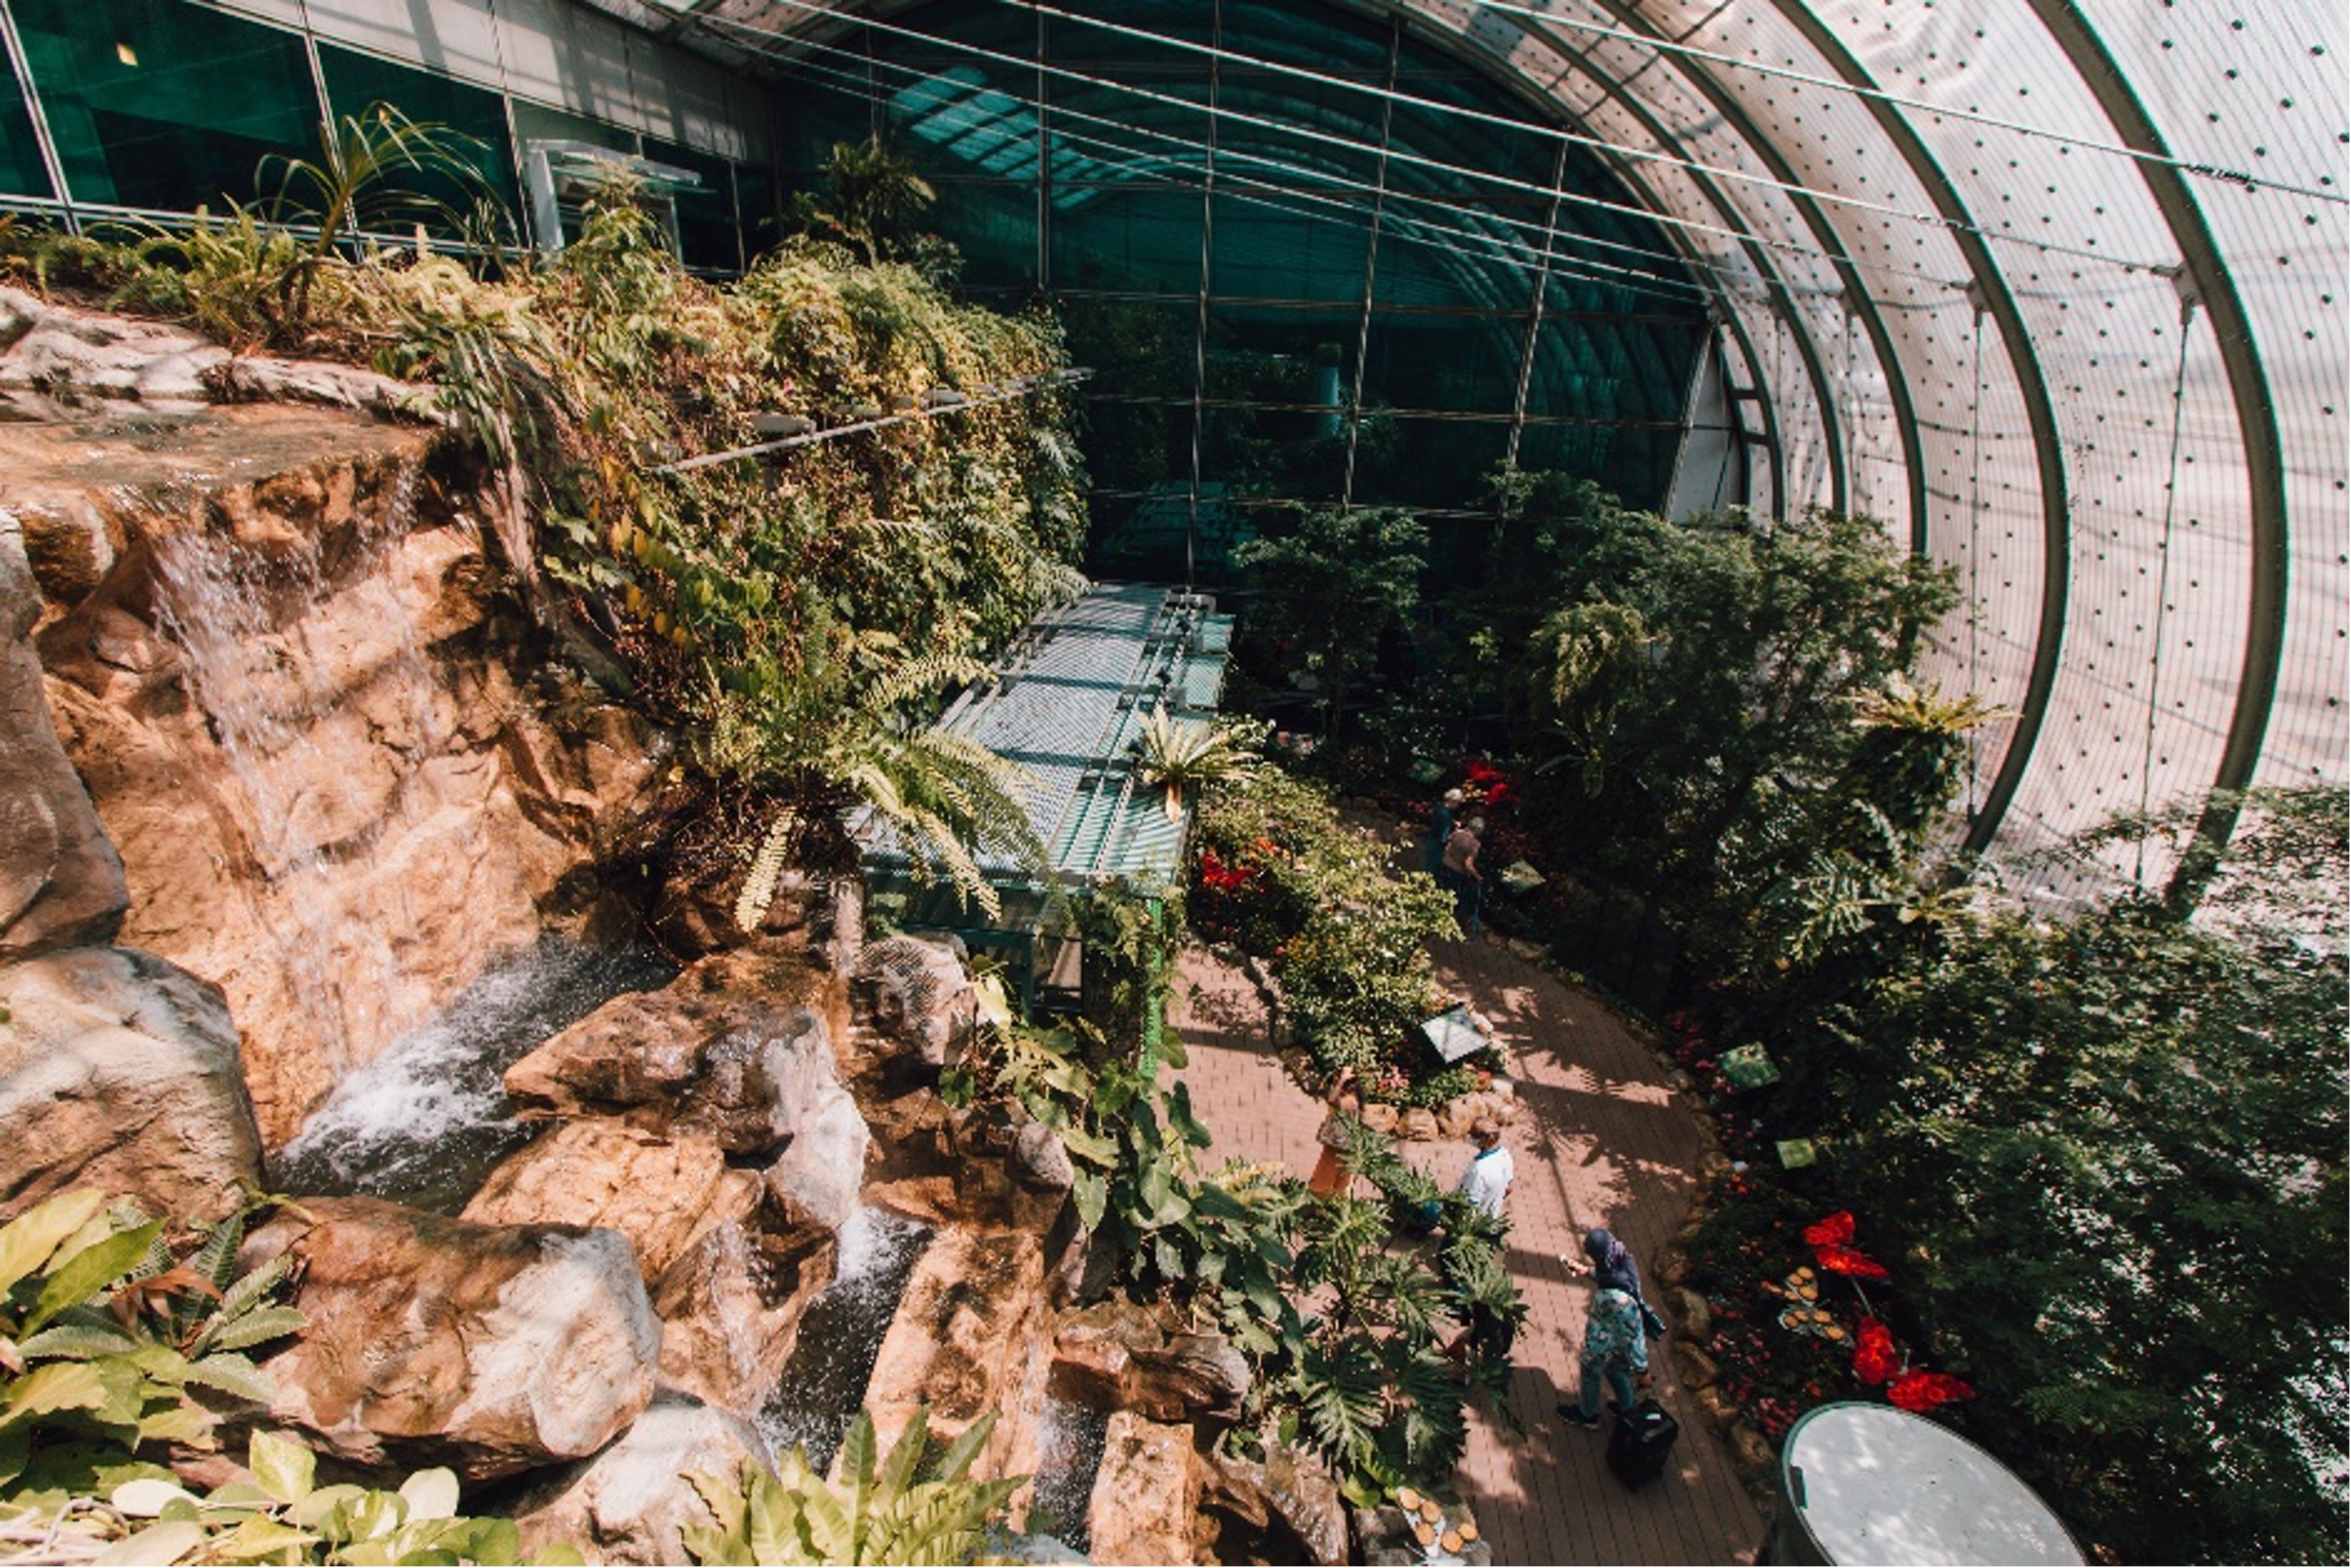 A wide shot of the butterfly garden filled with greenery with a cascading waterfall to the left